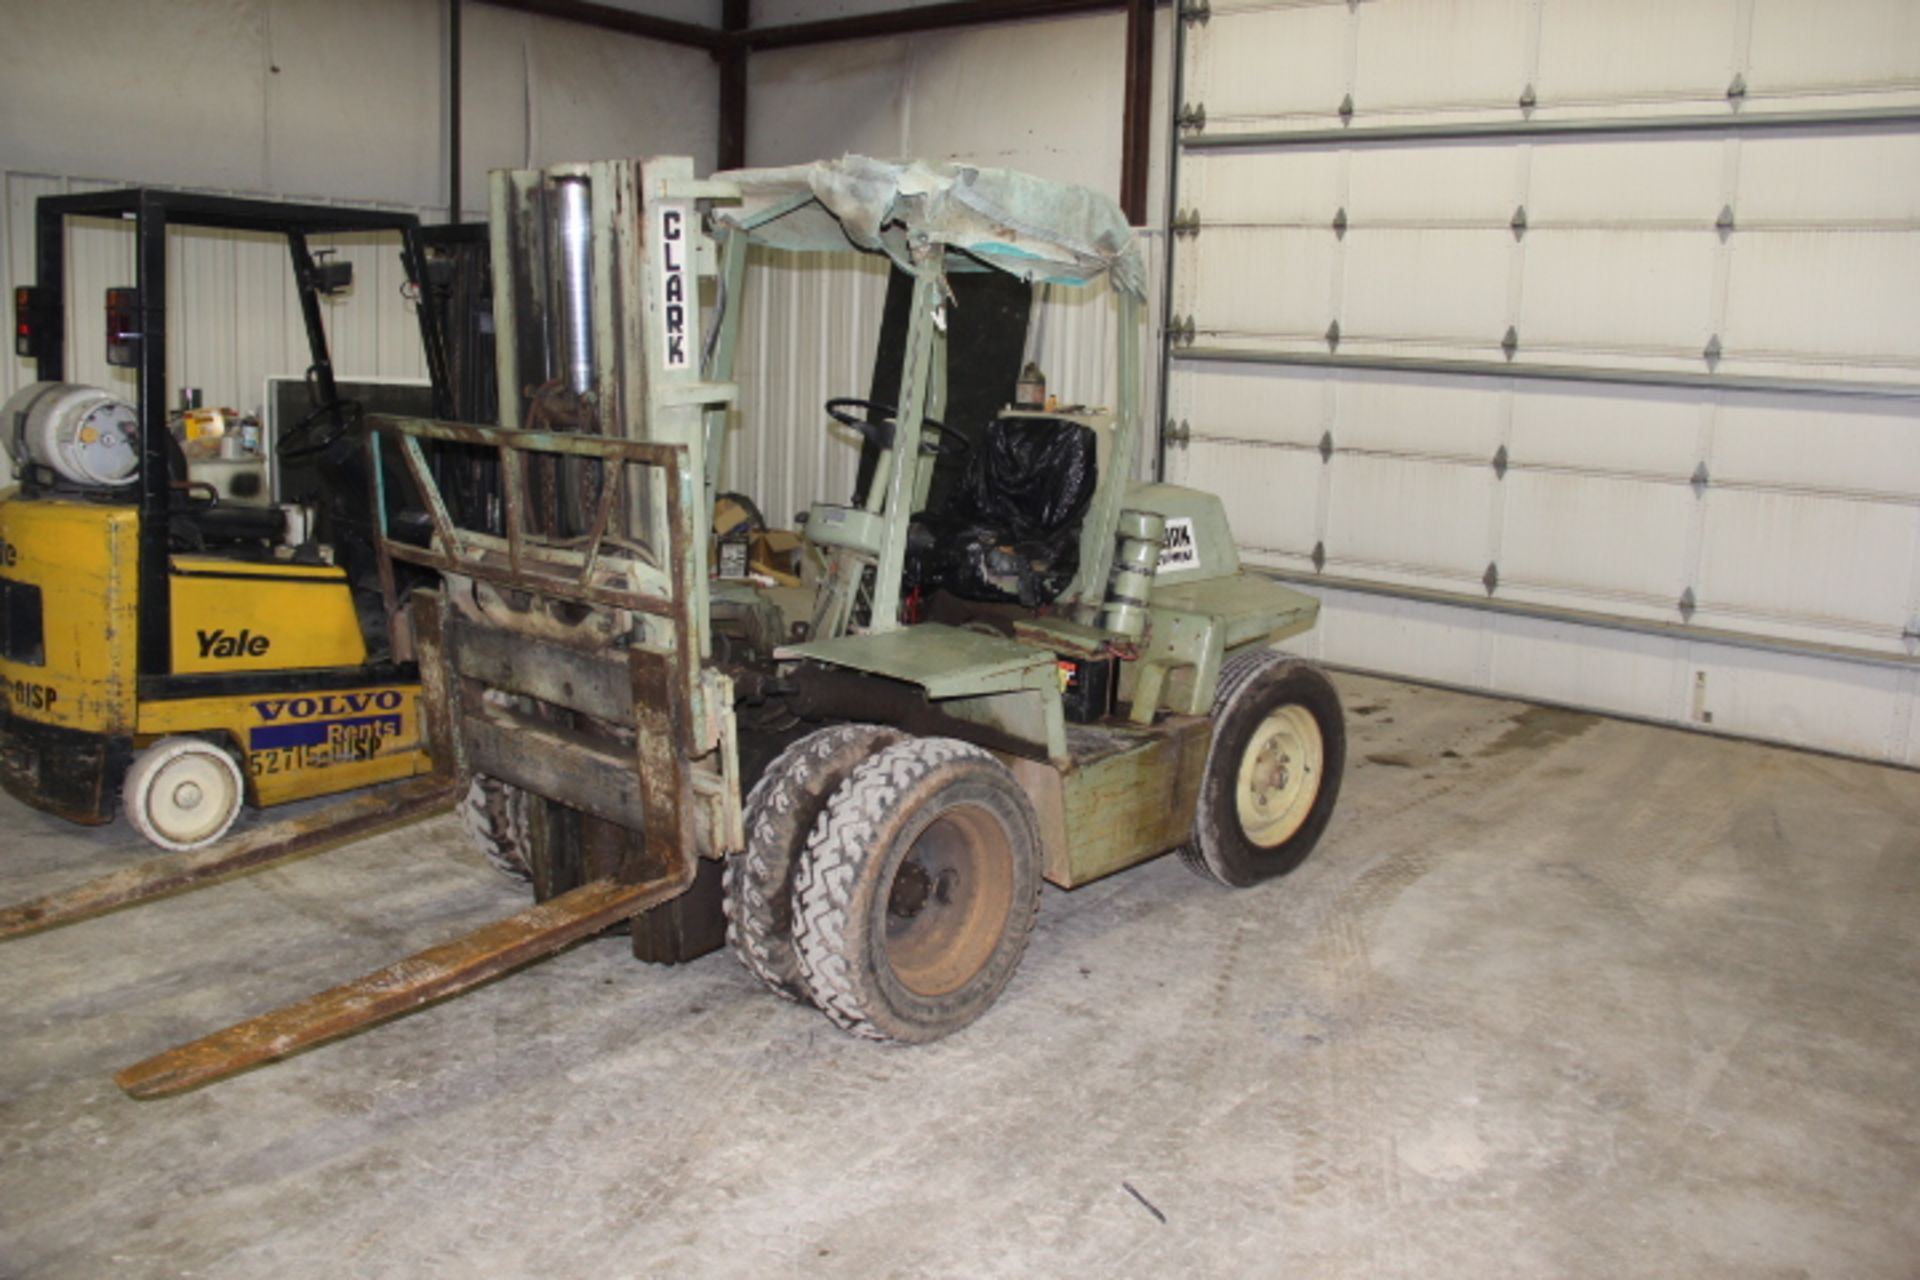 CLARK OUTDOOR FORK LIFT GAS POWERED, 3500 LB LIFT. 3 STAGE MAST, SIDE SHIFT. QUAD TIRES ON THE